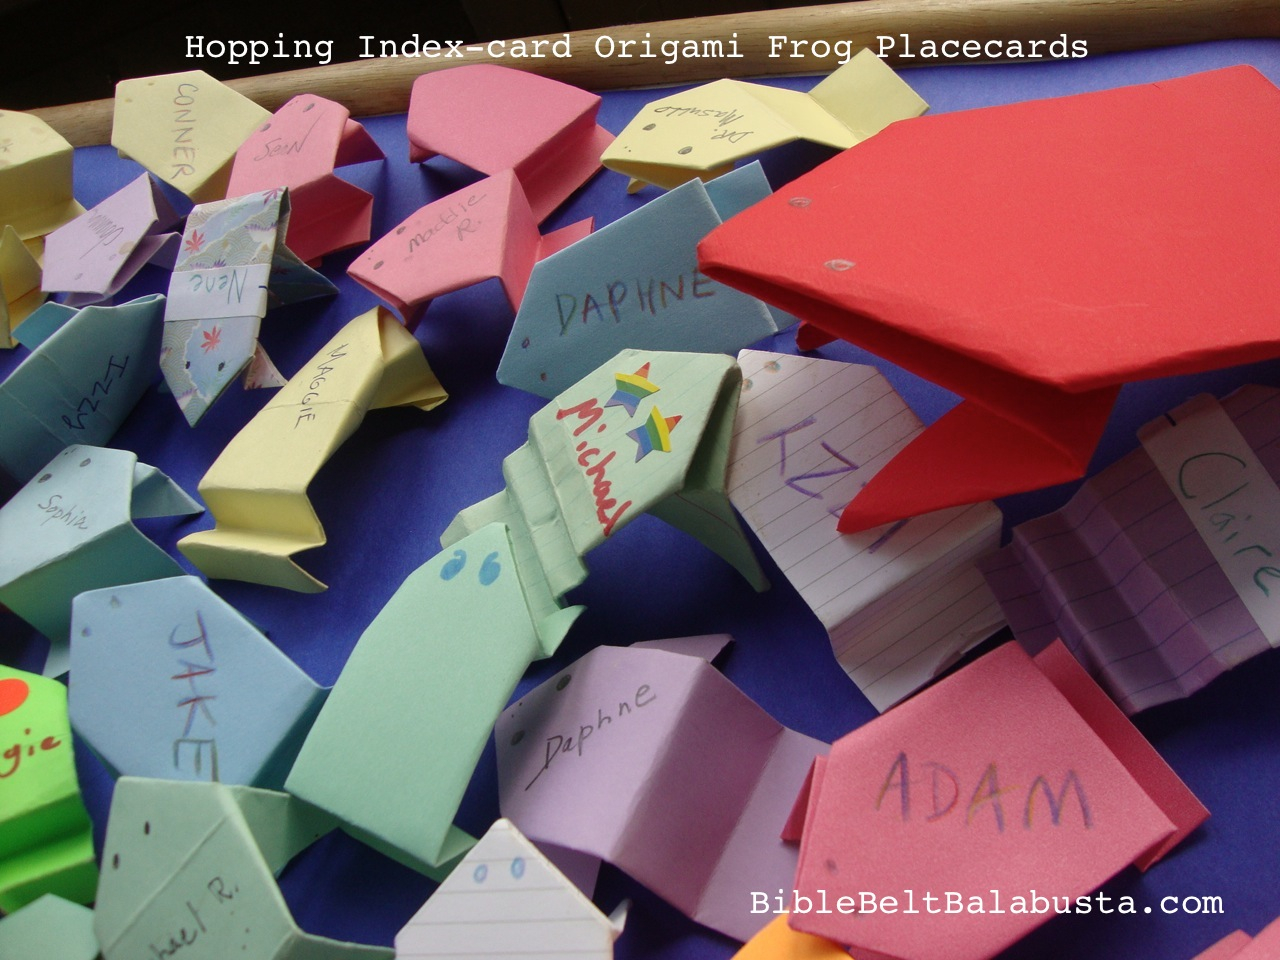 Index Card Origami Index Card Origami Frogs That Hop Passover Placecards Game Plague